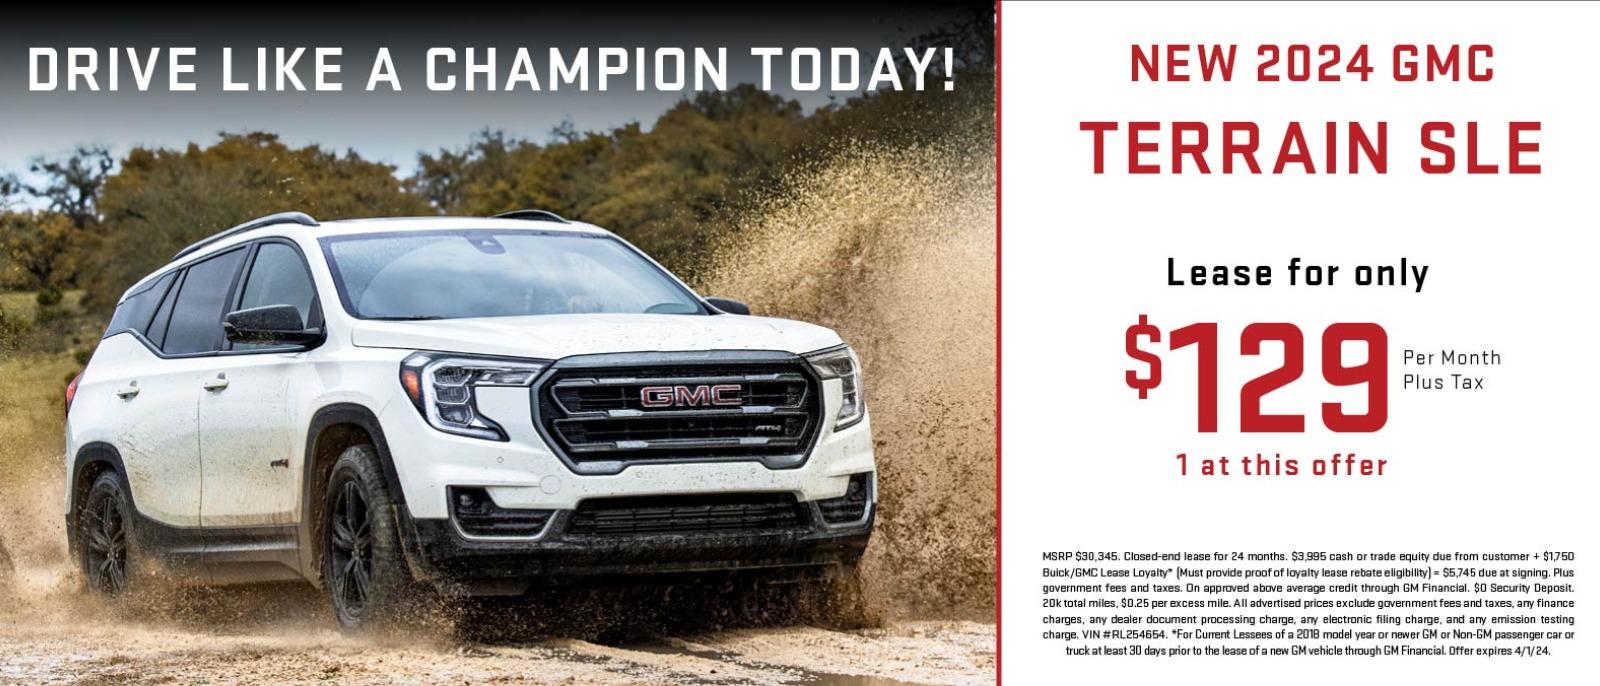 NEW 2024 GMC TERRAIN SLE Lease for only $129 1 at this offer Per Month Plus Tax